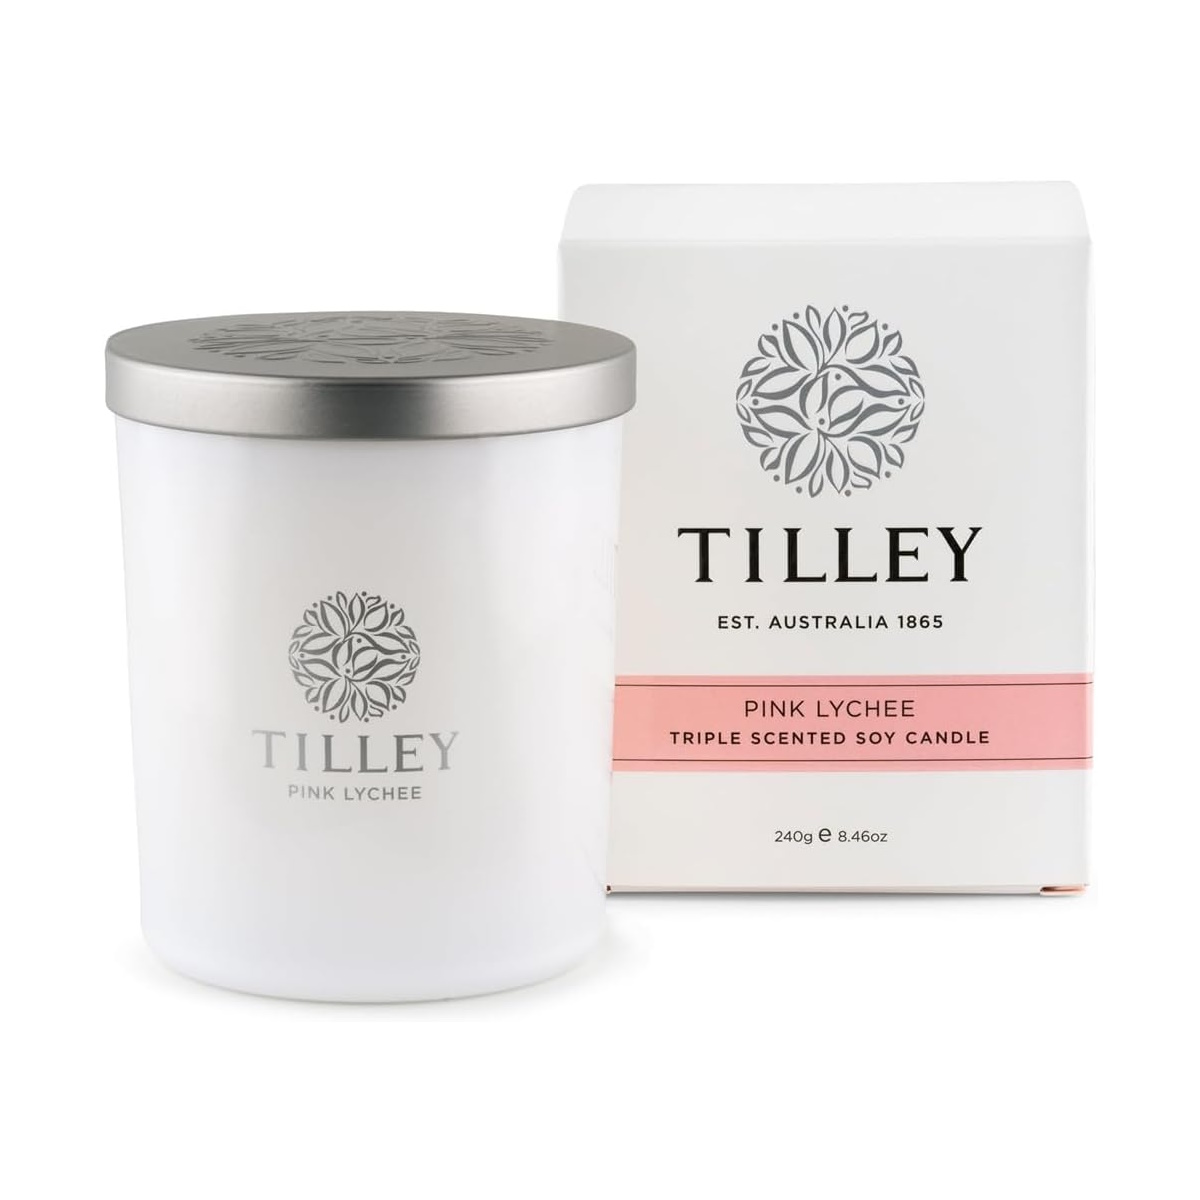  Tilley Classic White Soy Wax Candle 240g  Pink Lychee